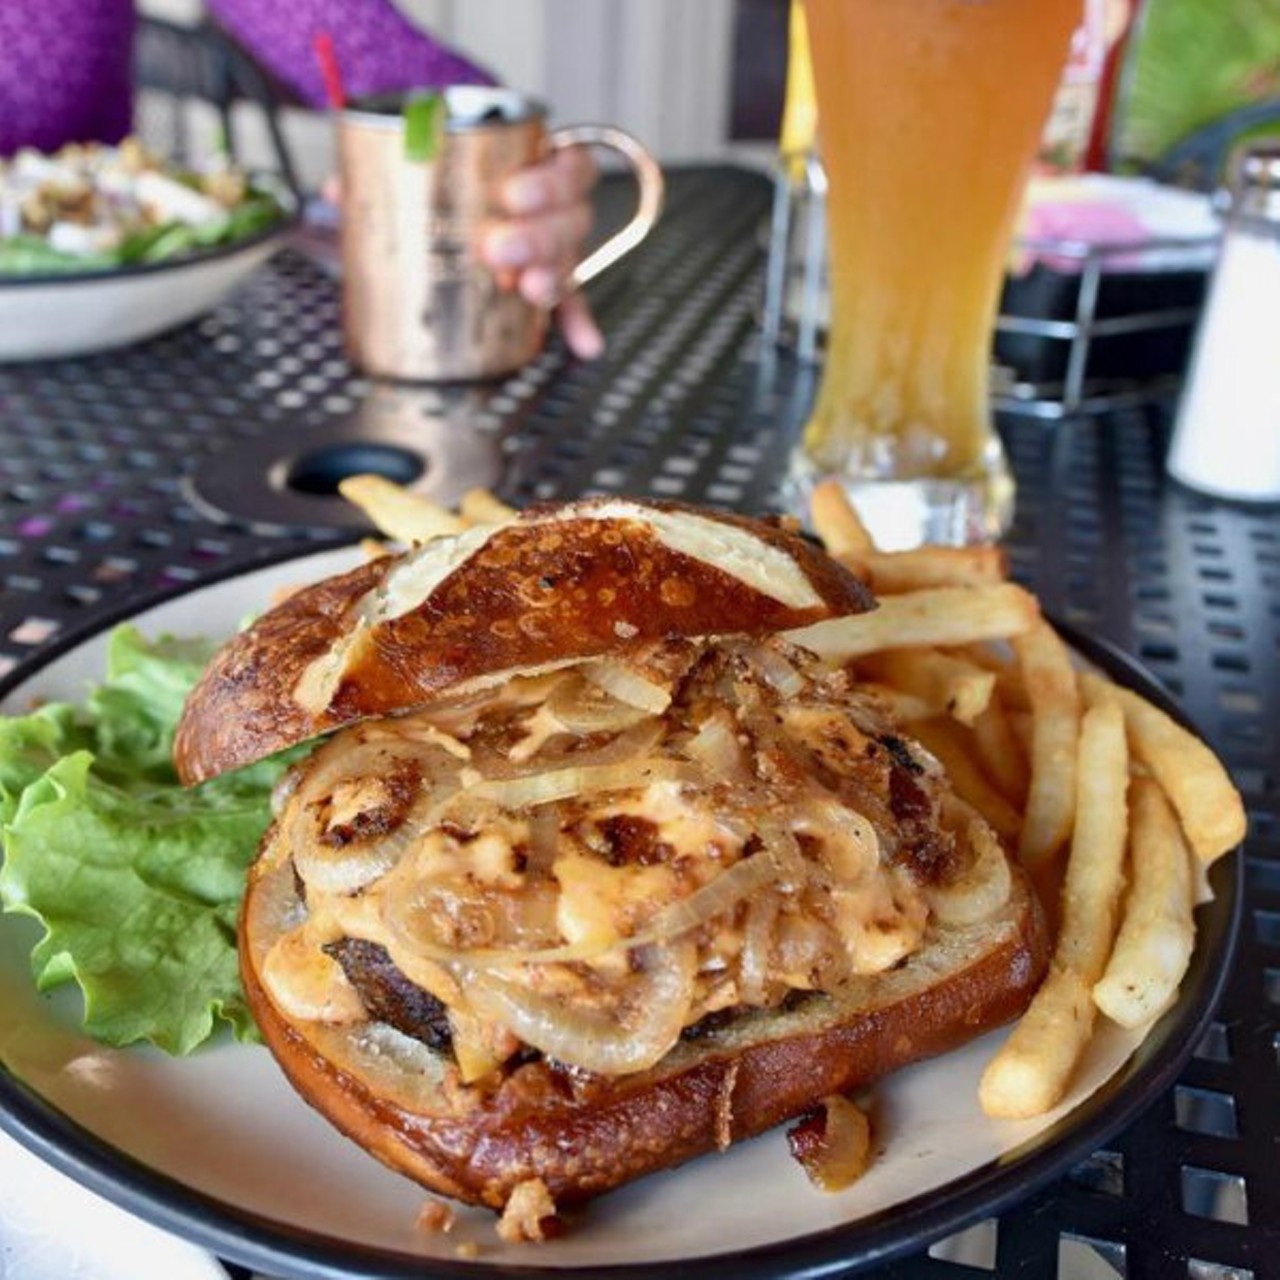 Mike Duffy's Pub and Grill (Kirkwood)
(124 W. Jefferson Avenue, Kirkwood; 314-821-2025)
Charbroiled burger on top a Companion pretzel bun, topped with beer cheese, bourbon bacon jam and caramelized onions.